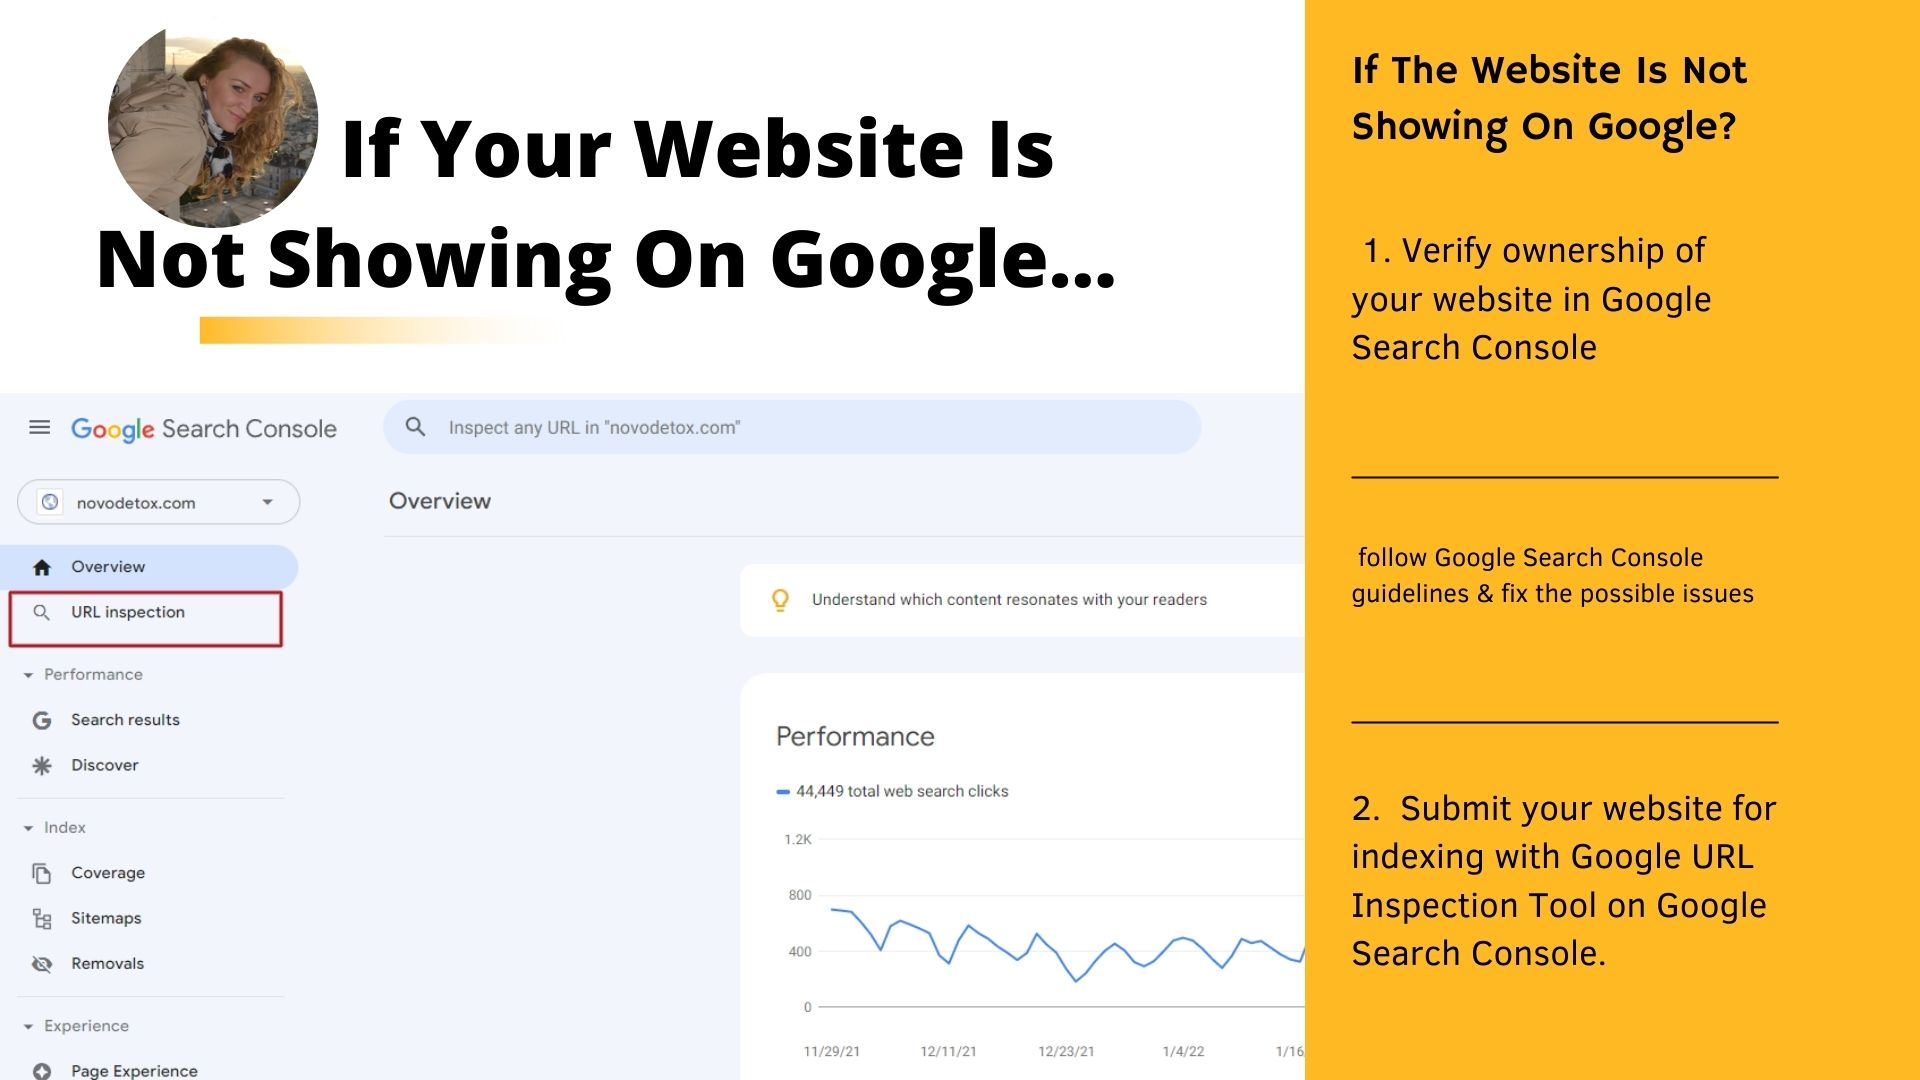 Why Is My Website Not Showing Up On Google Search? Search Console